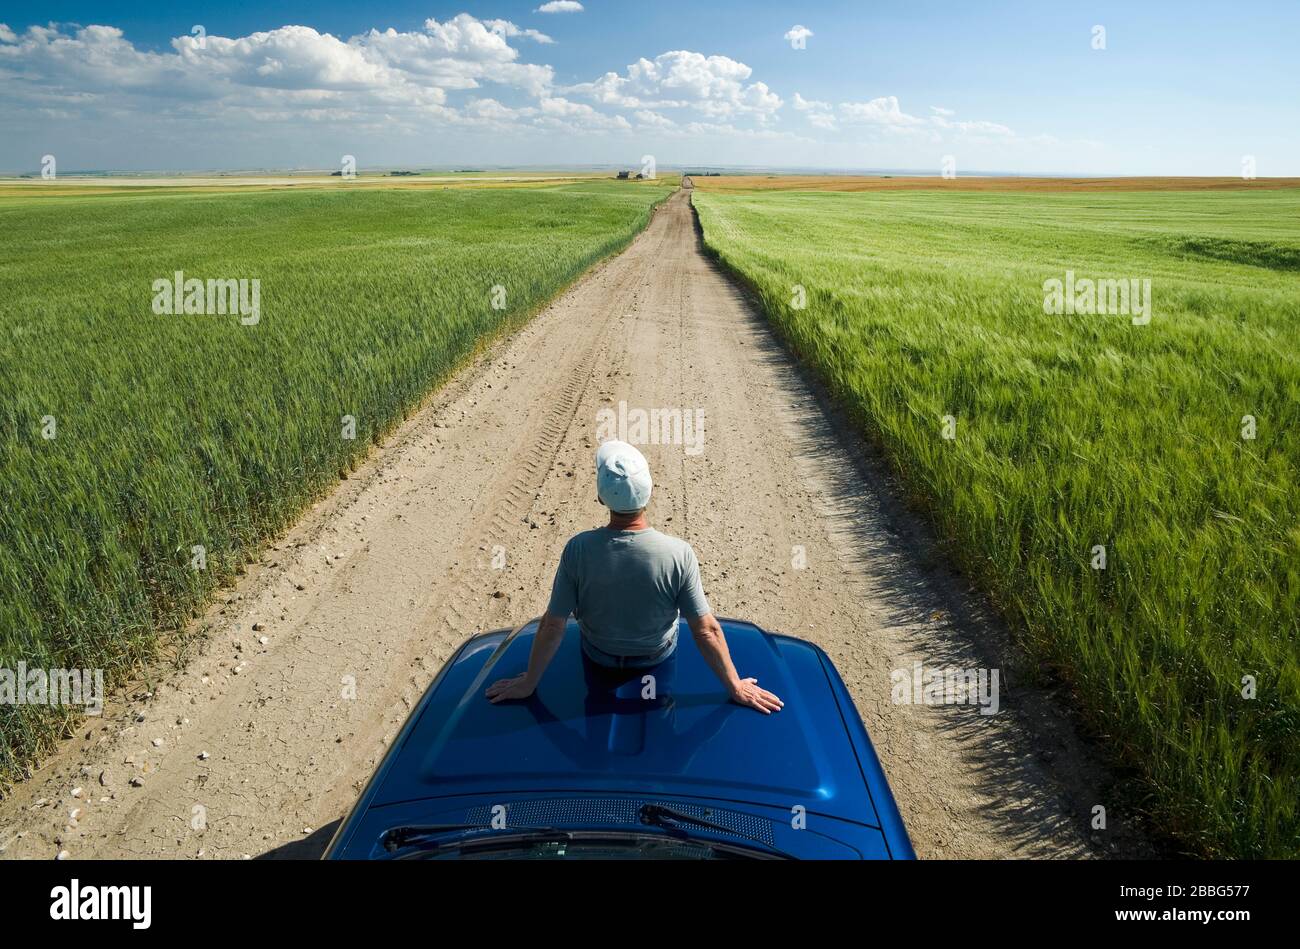 a man sits on a farm truck looking out over a gravel road with durum wheat and barley fields on the side, near Ponteix, Saskatchewan, Canada Stock Photo